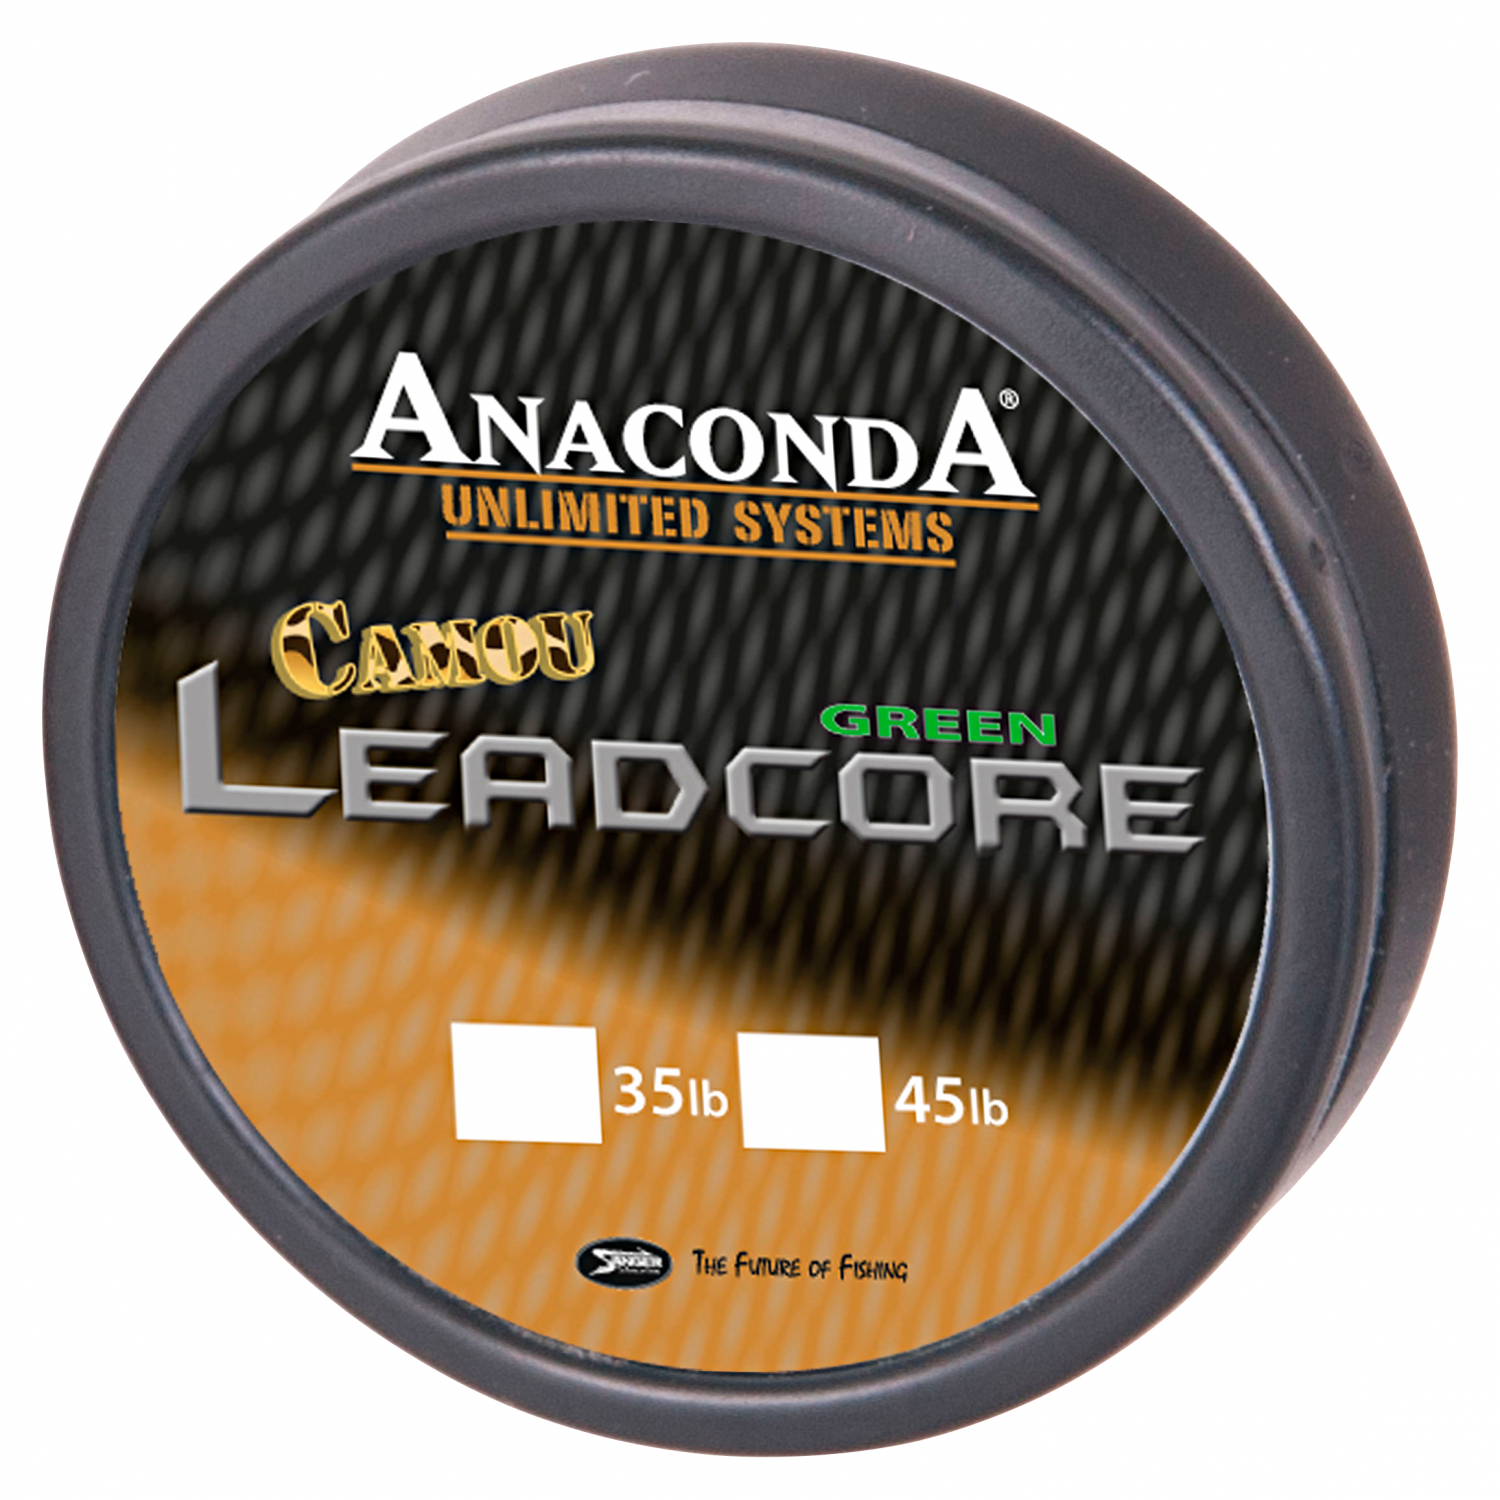 Anaconda Leader Line (Camou Leadcore) at low prices